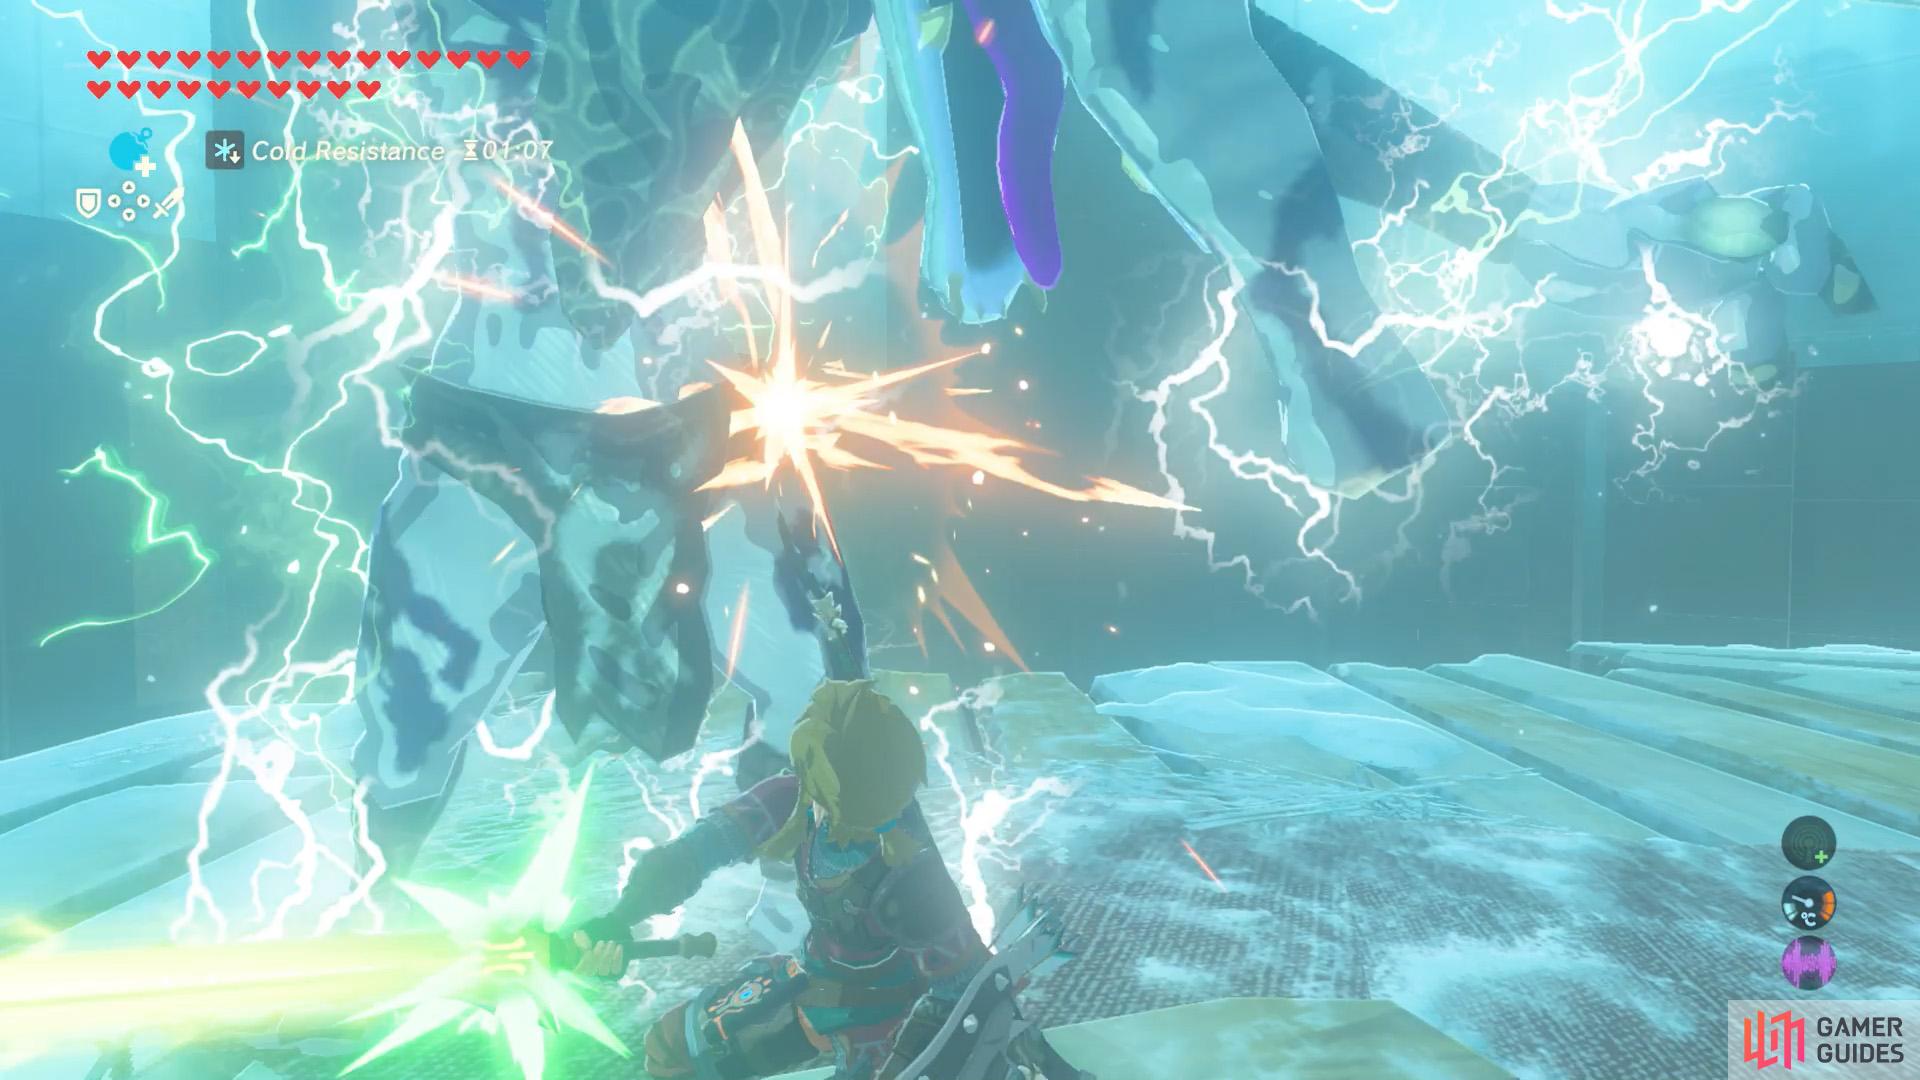 Disarm the Silver Moblin with the Thunderblade or Shock Arrows.